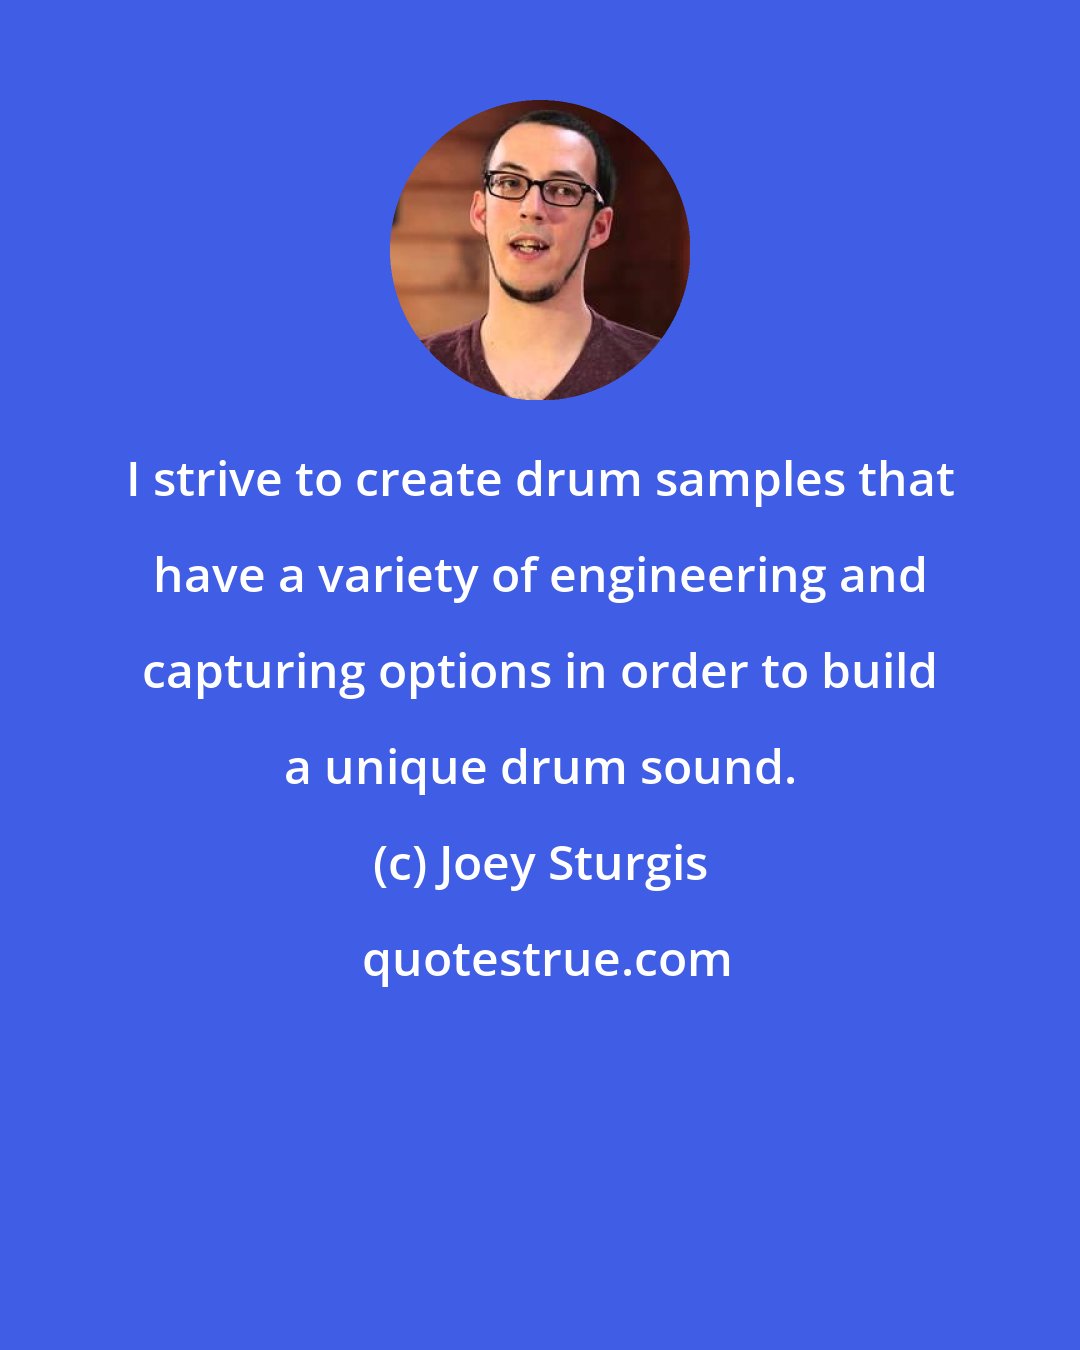 Joey Sturgis: I strive to create drum samples that have a variety of engineering and capturing options in order to build a unique drum sound.